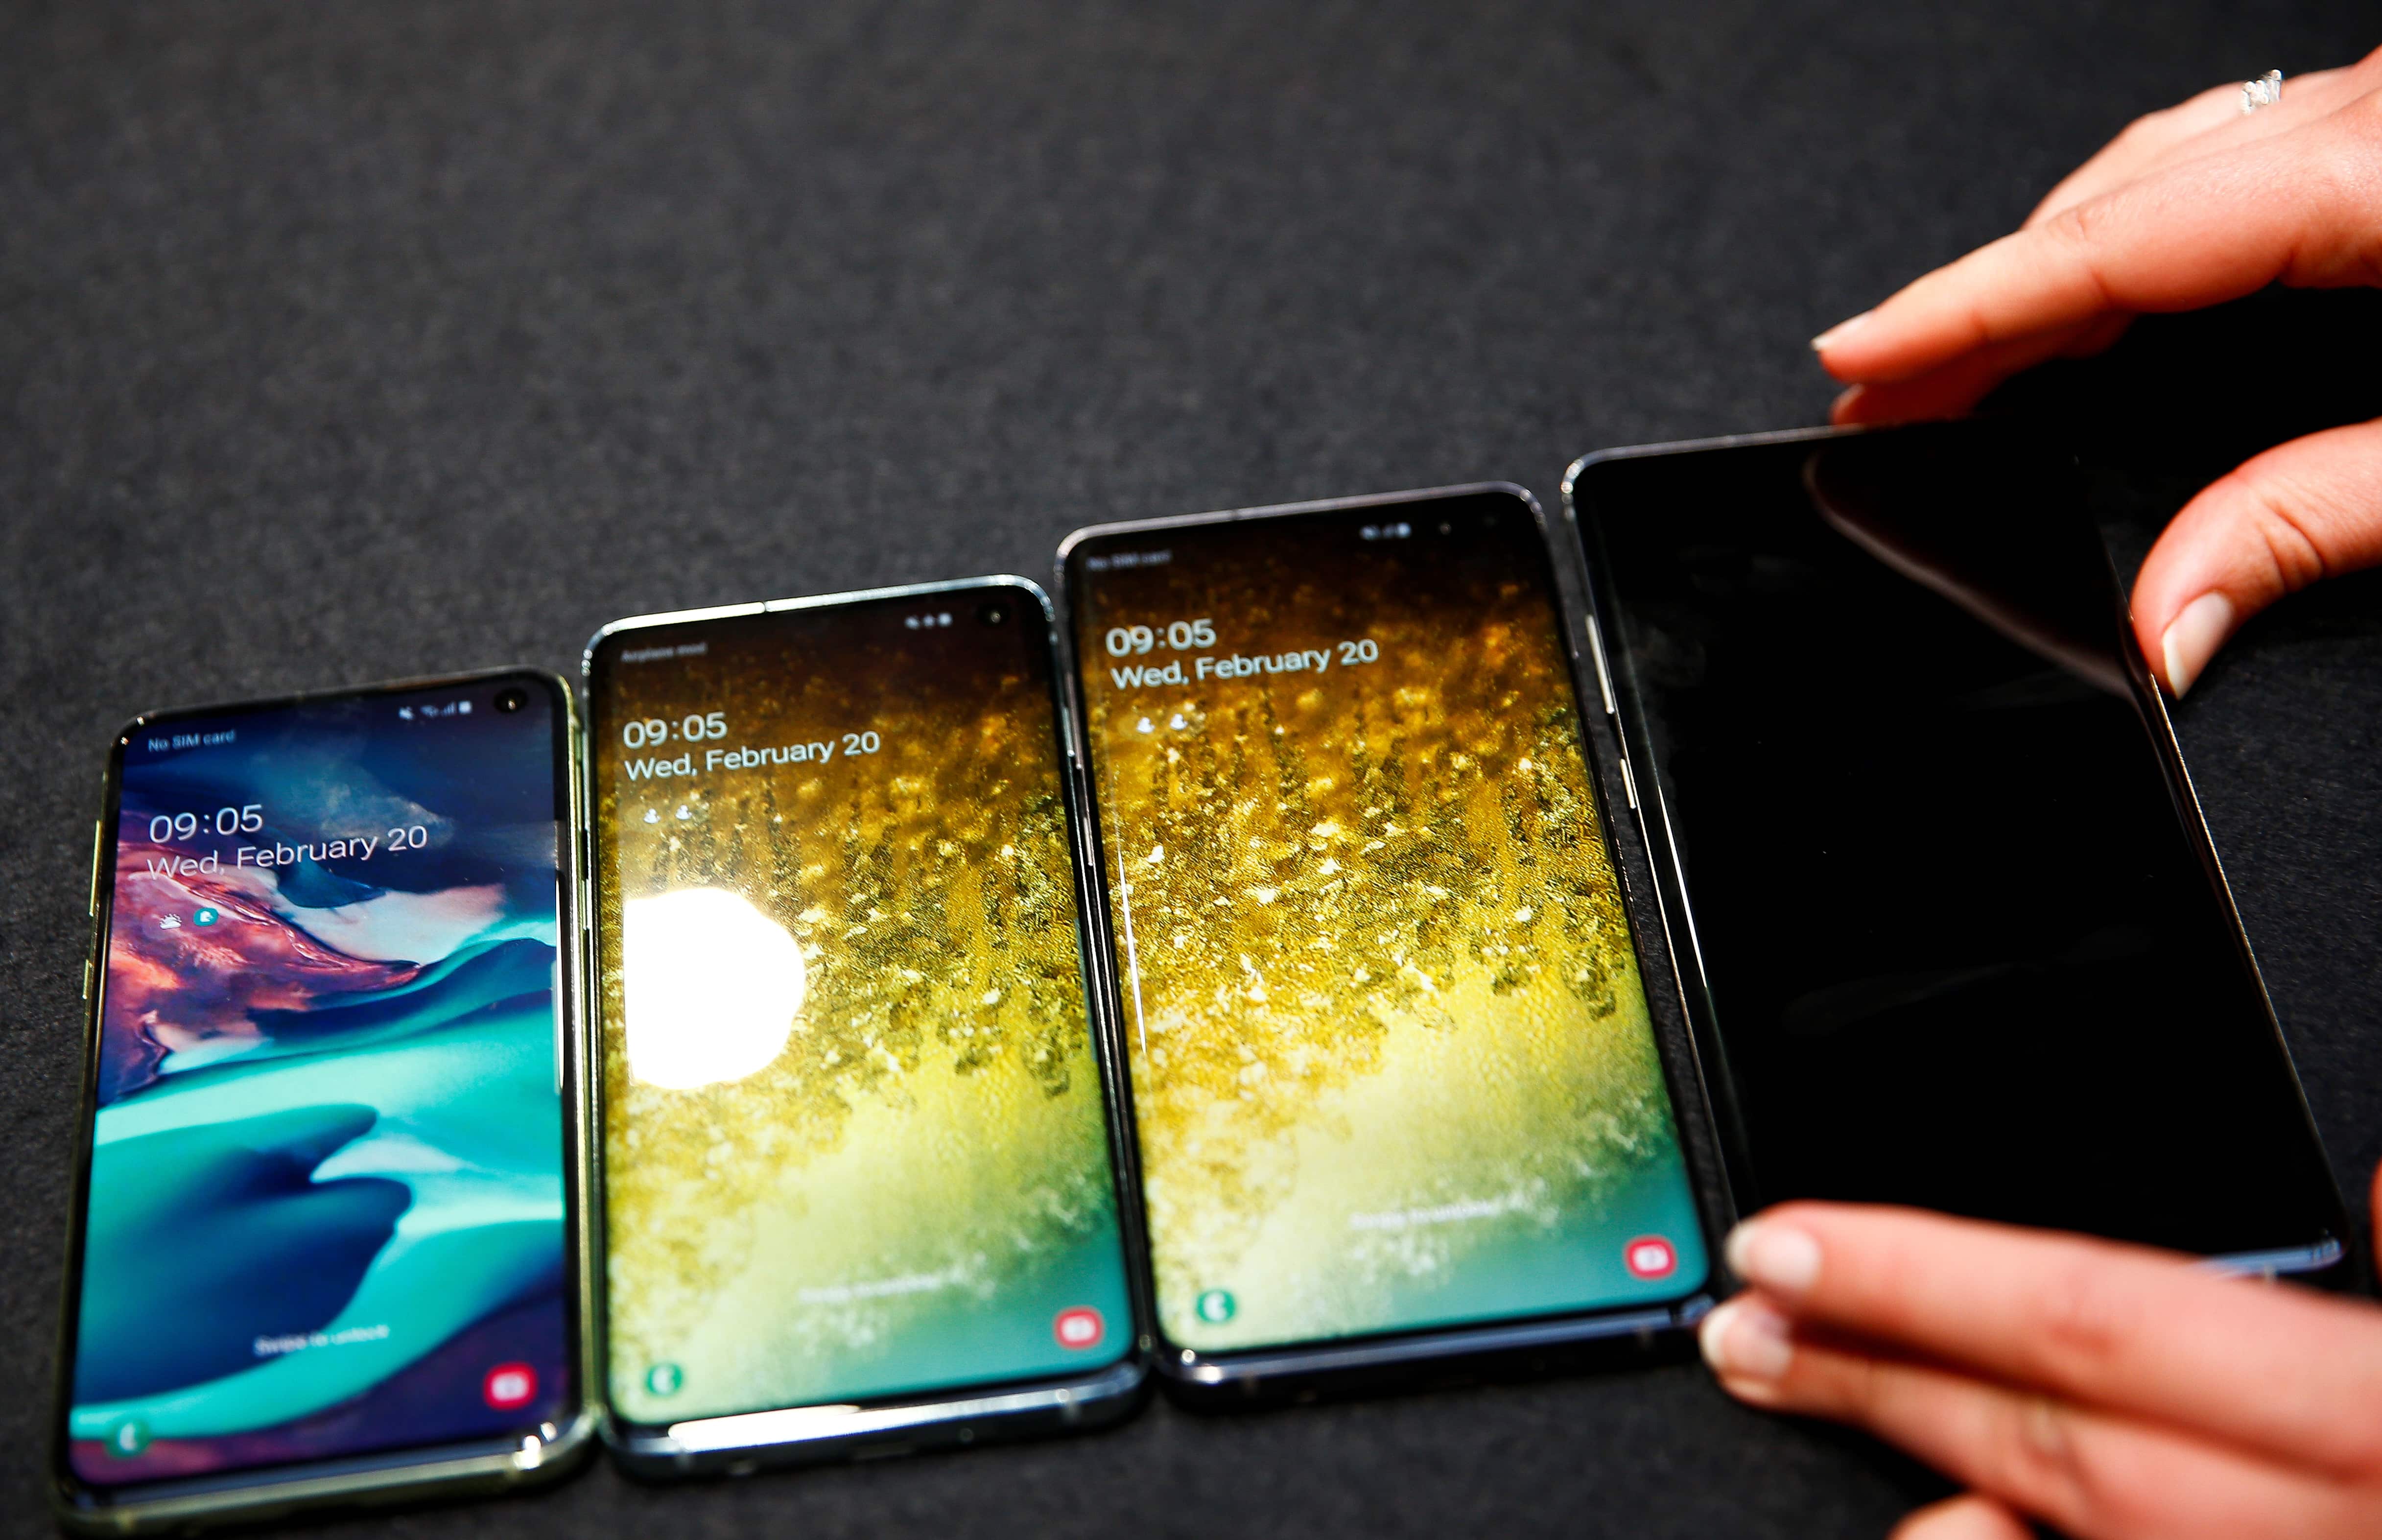 Samsung Galaxy S10, other devices